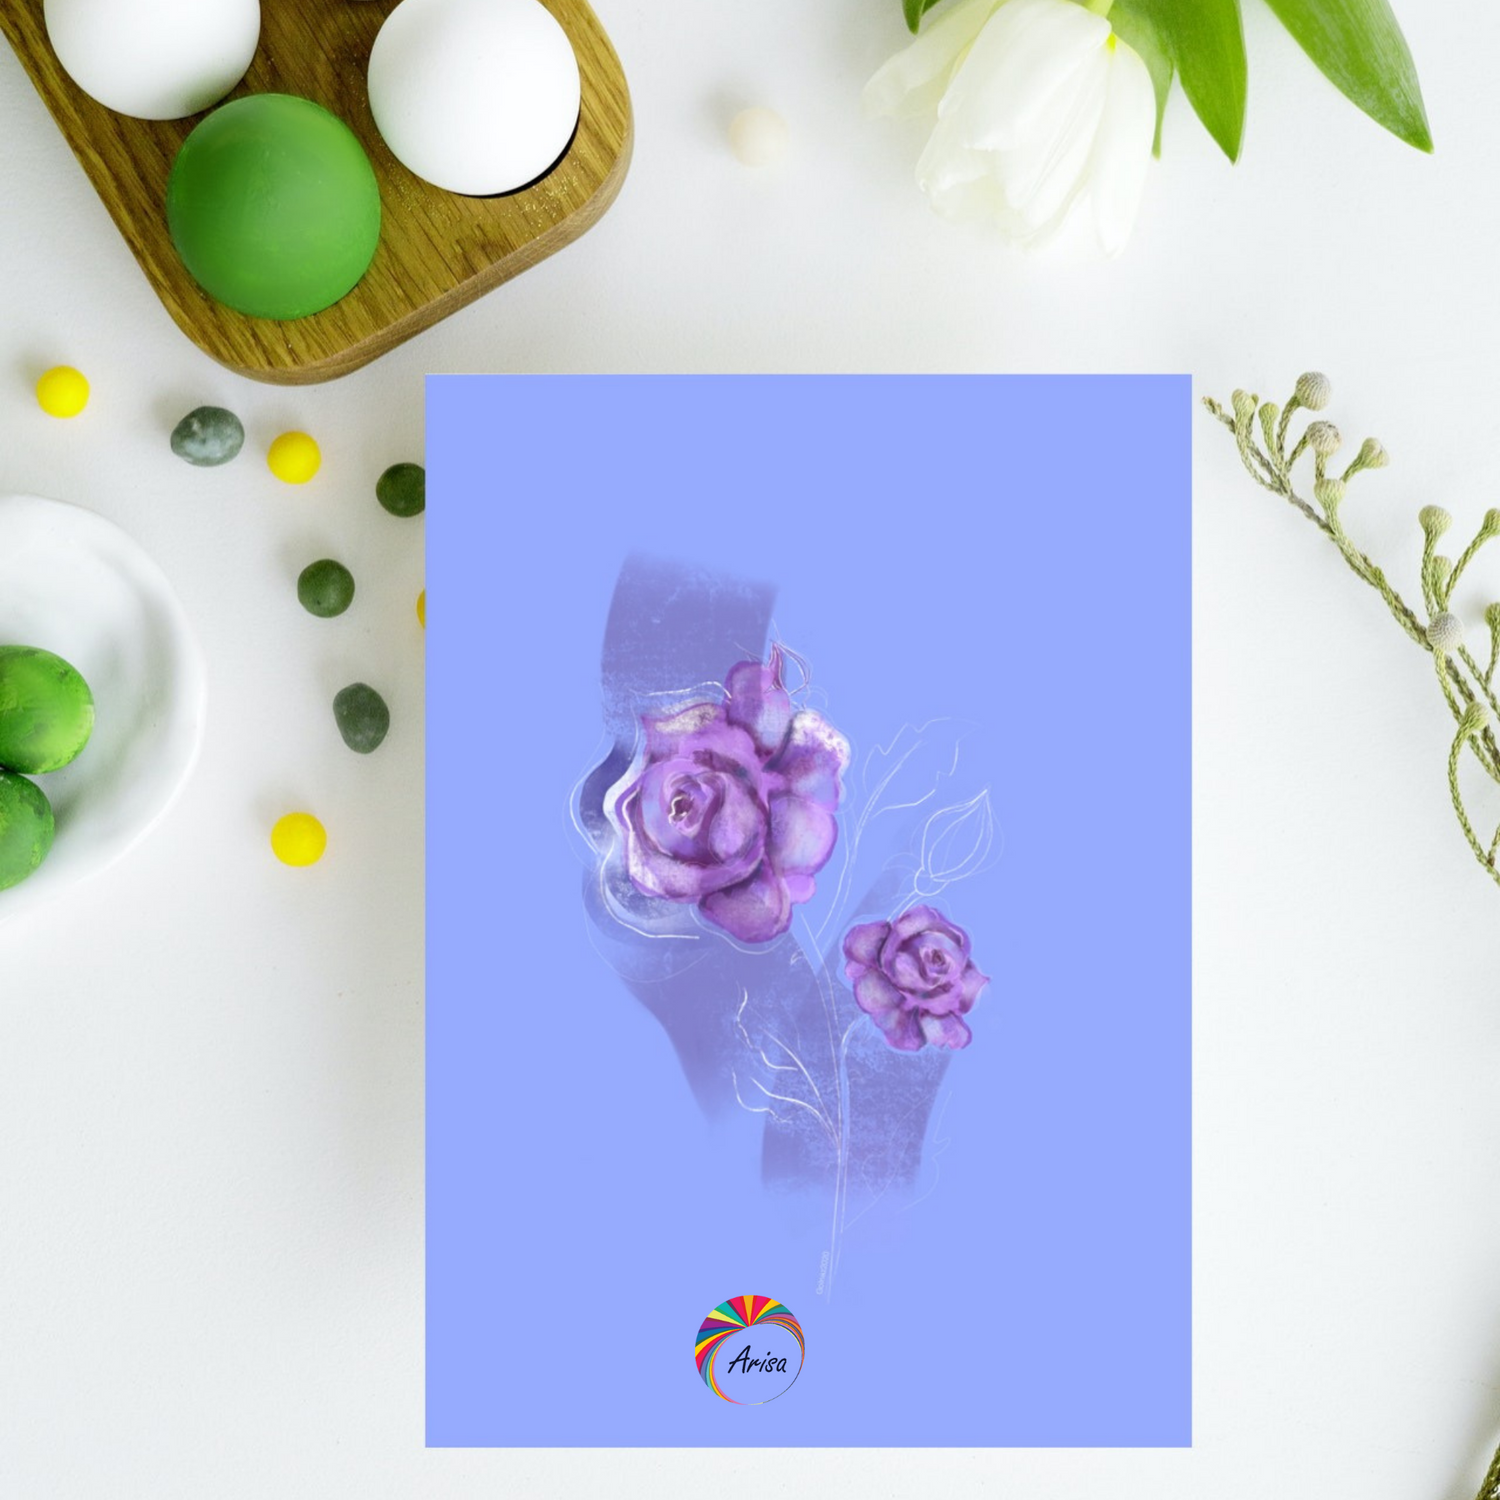 "ROSE" Greeting Card by ArisaTeam ideal as an Easter card.